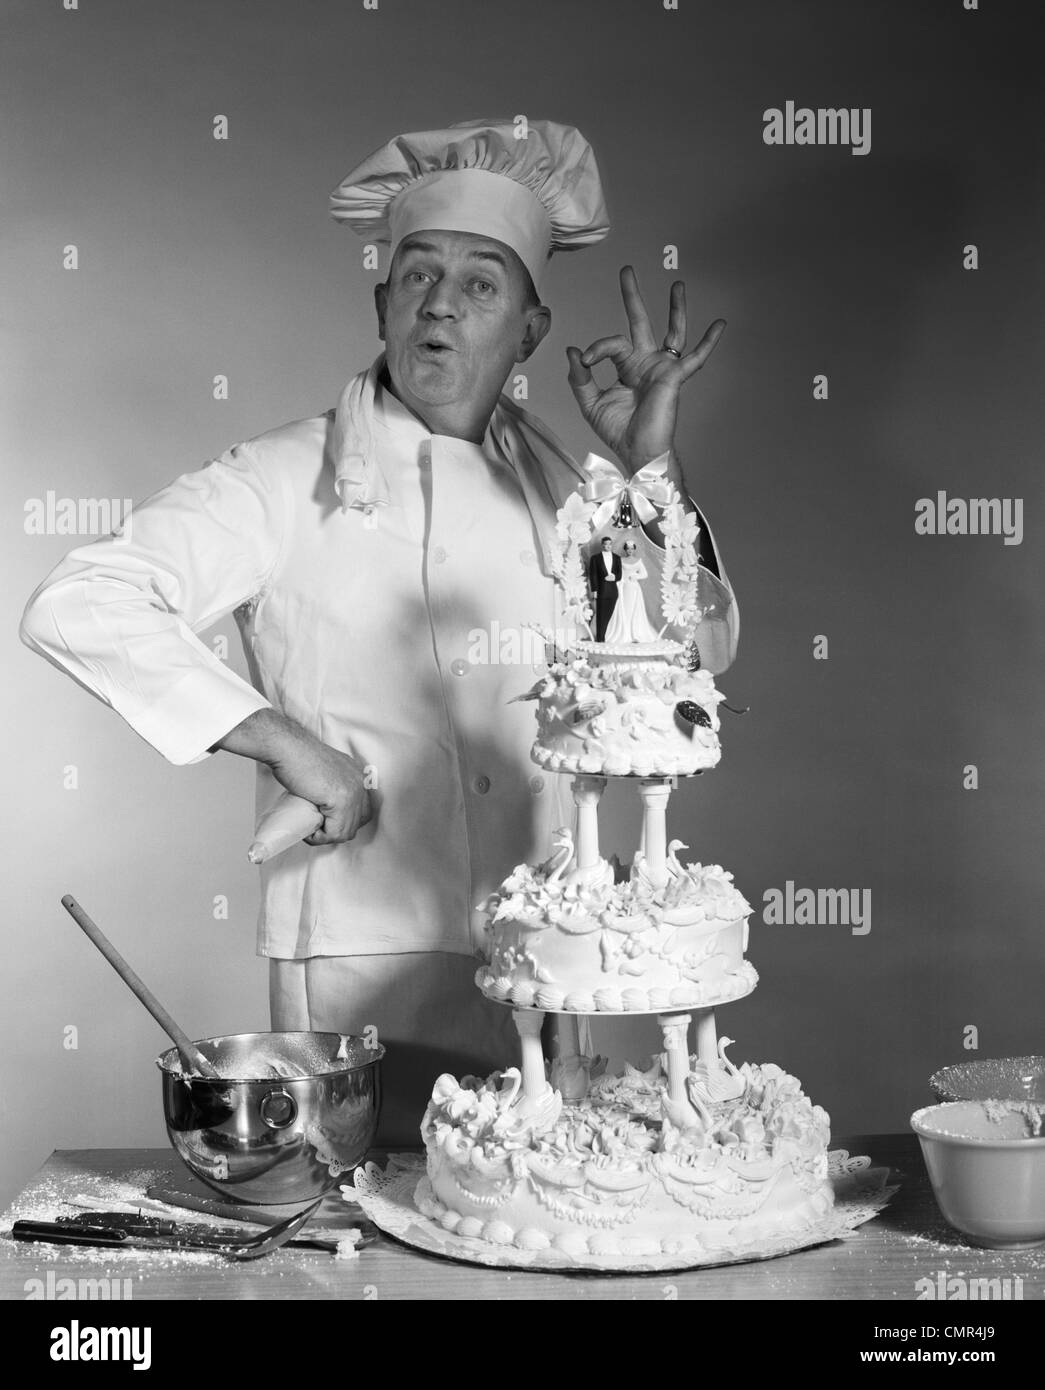 1950s 1960s 1970s MAN PORTRAIT BAKER LOOKING AT CAMERA MAKING OK HAND SIGN NEXT TO THREE TIER WEDDING CAKE BRIDE & GROOM ON TOP Stock Photo